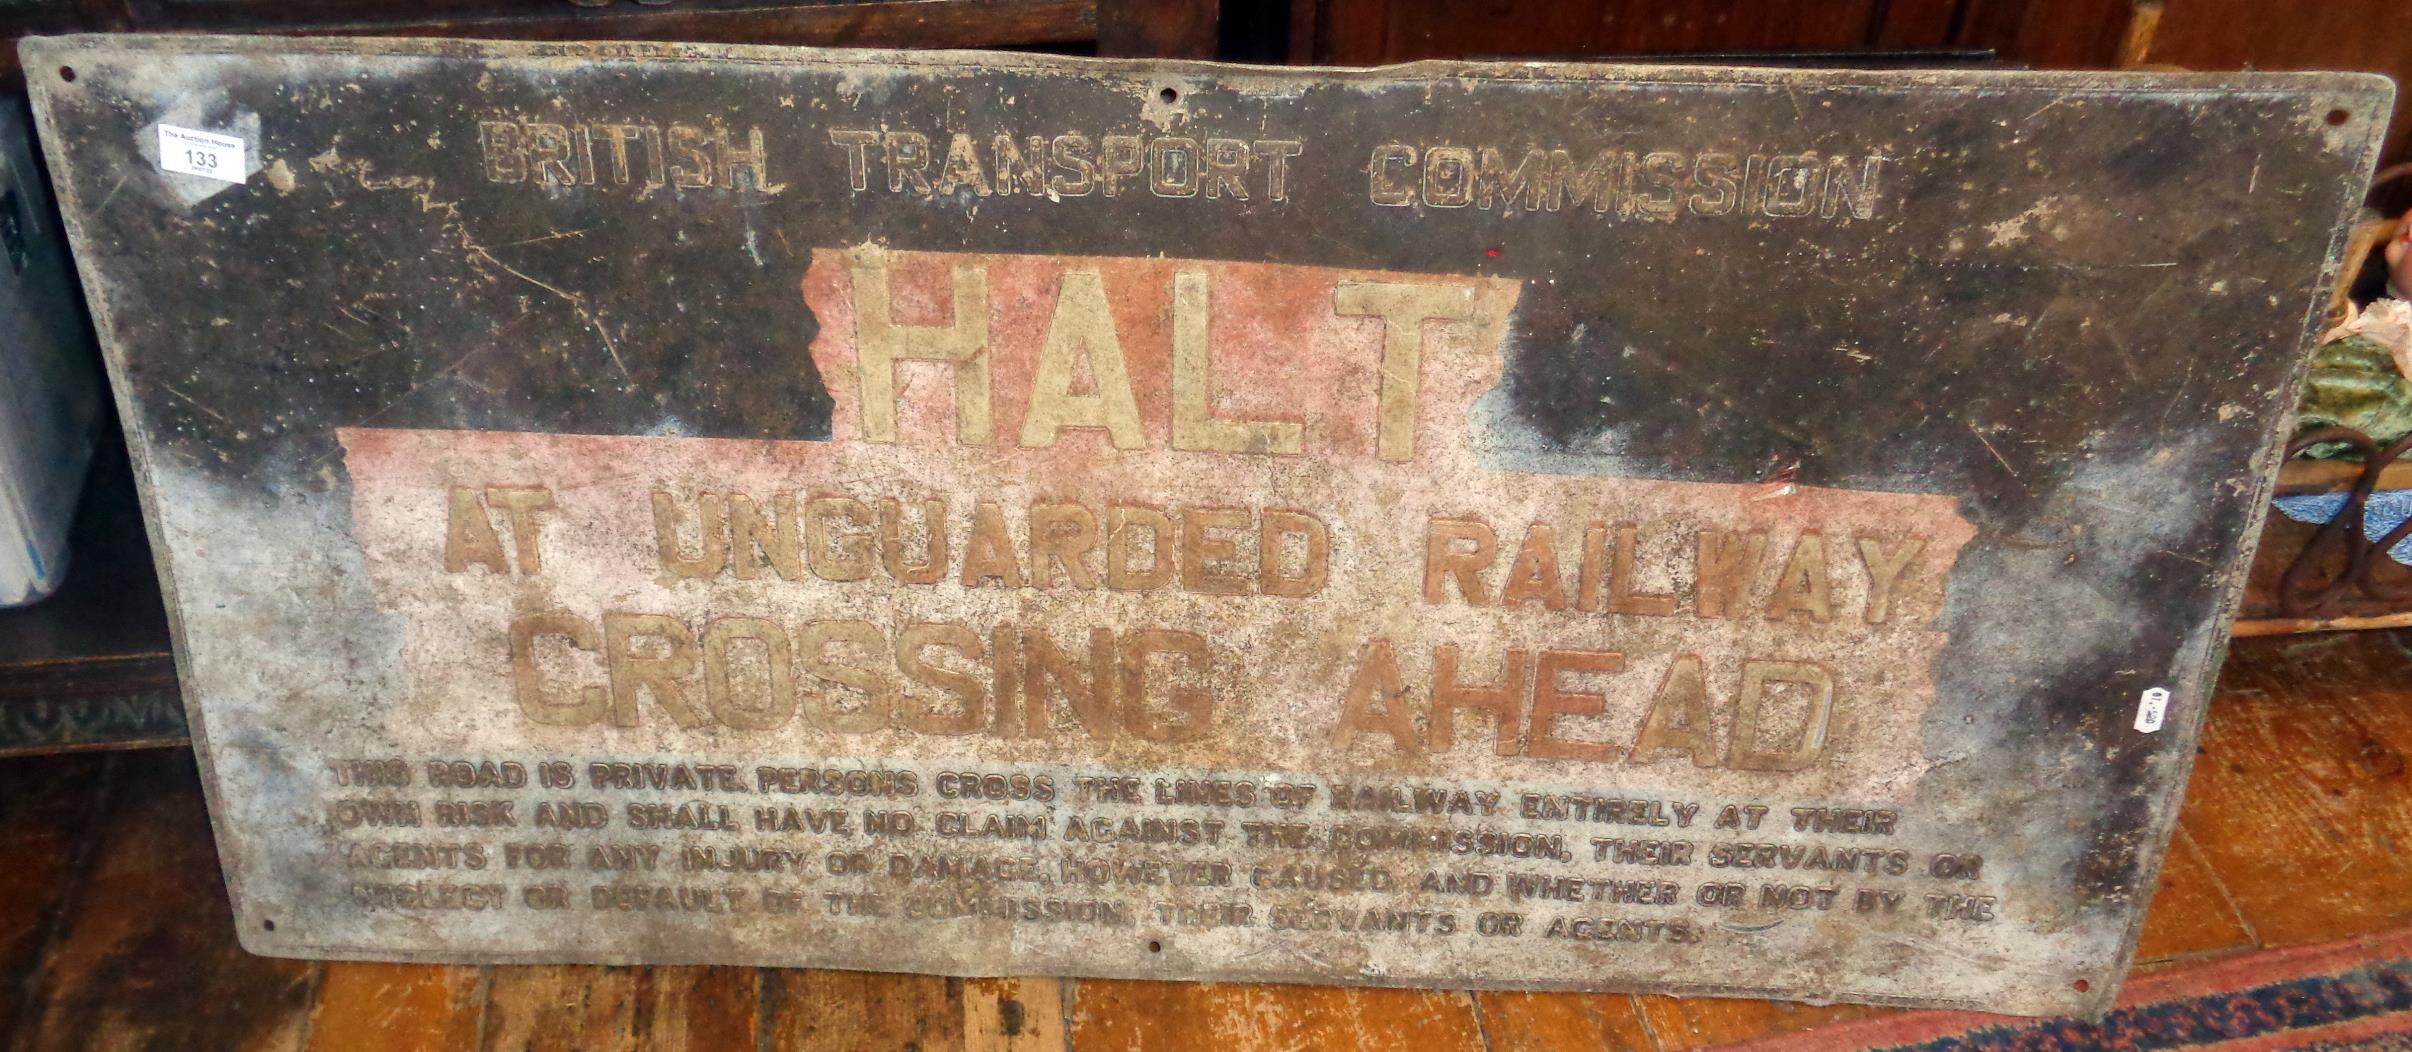 Railway crossing sign for British Transport Commission. "HALT at unguarded railway crossing ahead